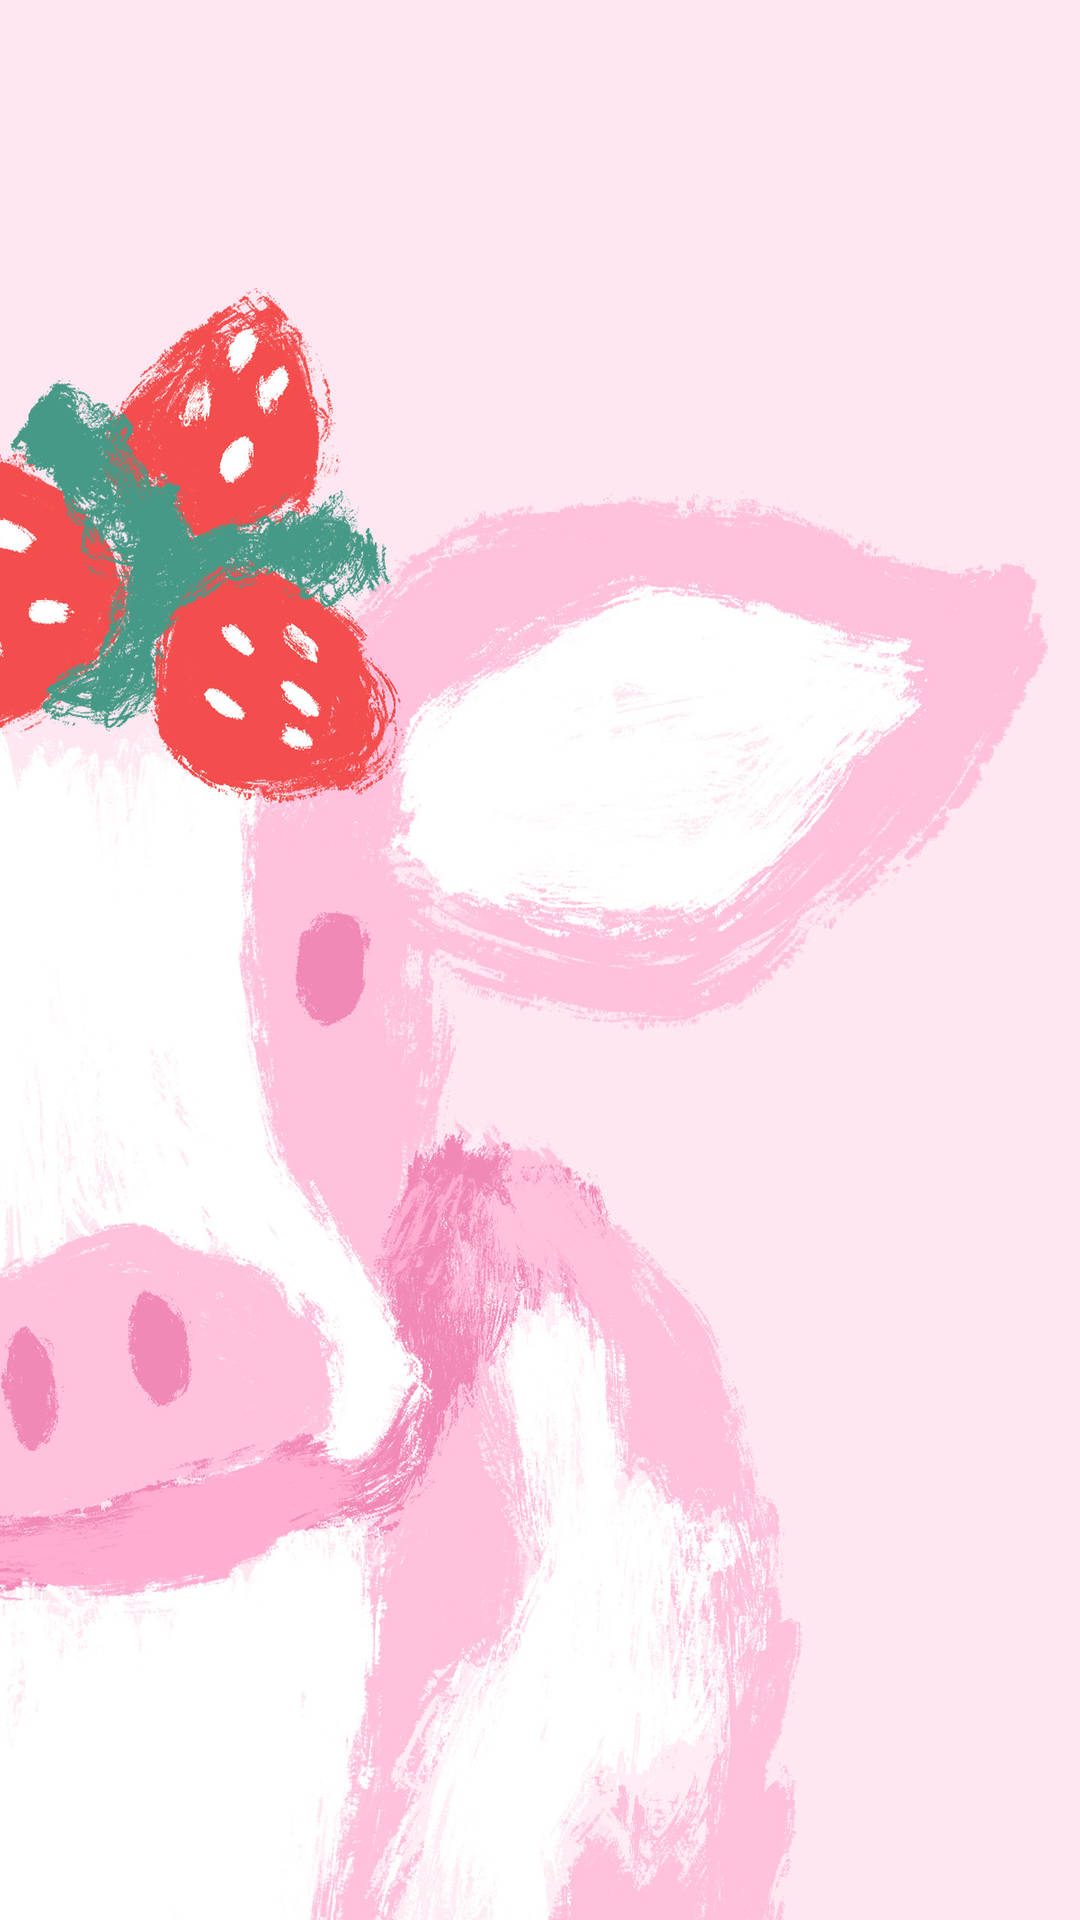 Strawberry Cow Crayon-Style Illustration Wallpaper